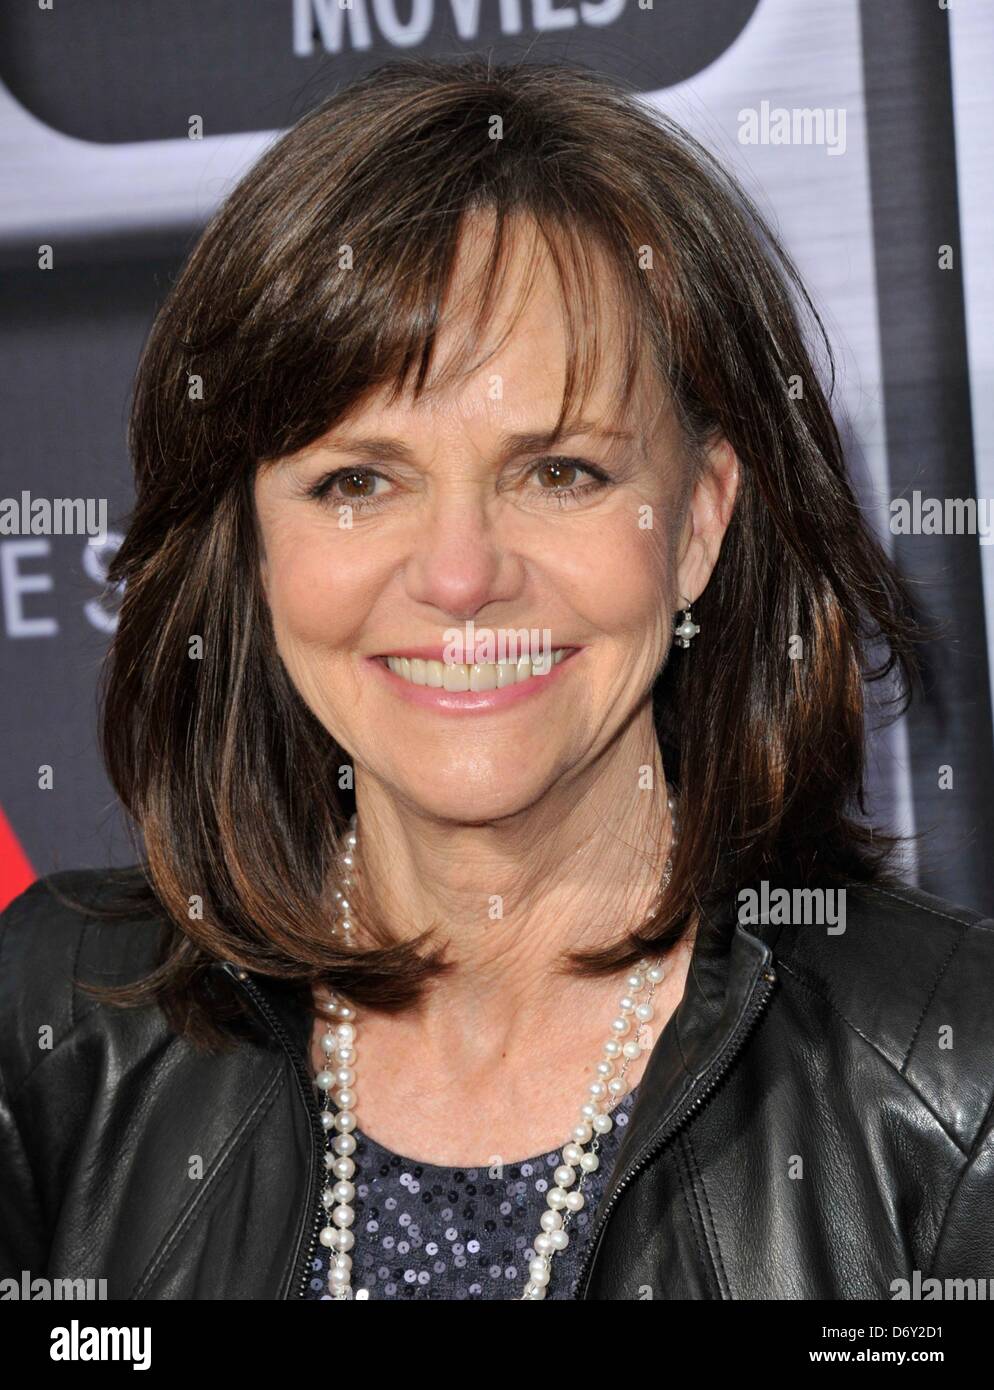 Los Angeles, USA. 24th April, 2013. Sally Fields at arrivals for Target Presents AFI Night At The Movies, Arclight Hollywood, Los Angeles, CA April 24, 2013. Photo By: Dee Cercone/Everett Collection/Alamy Live News Stock Photo